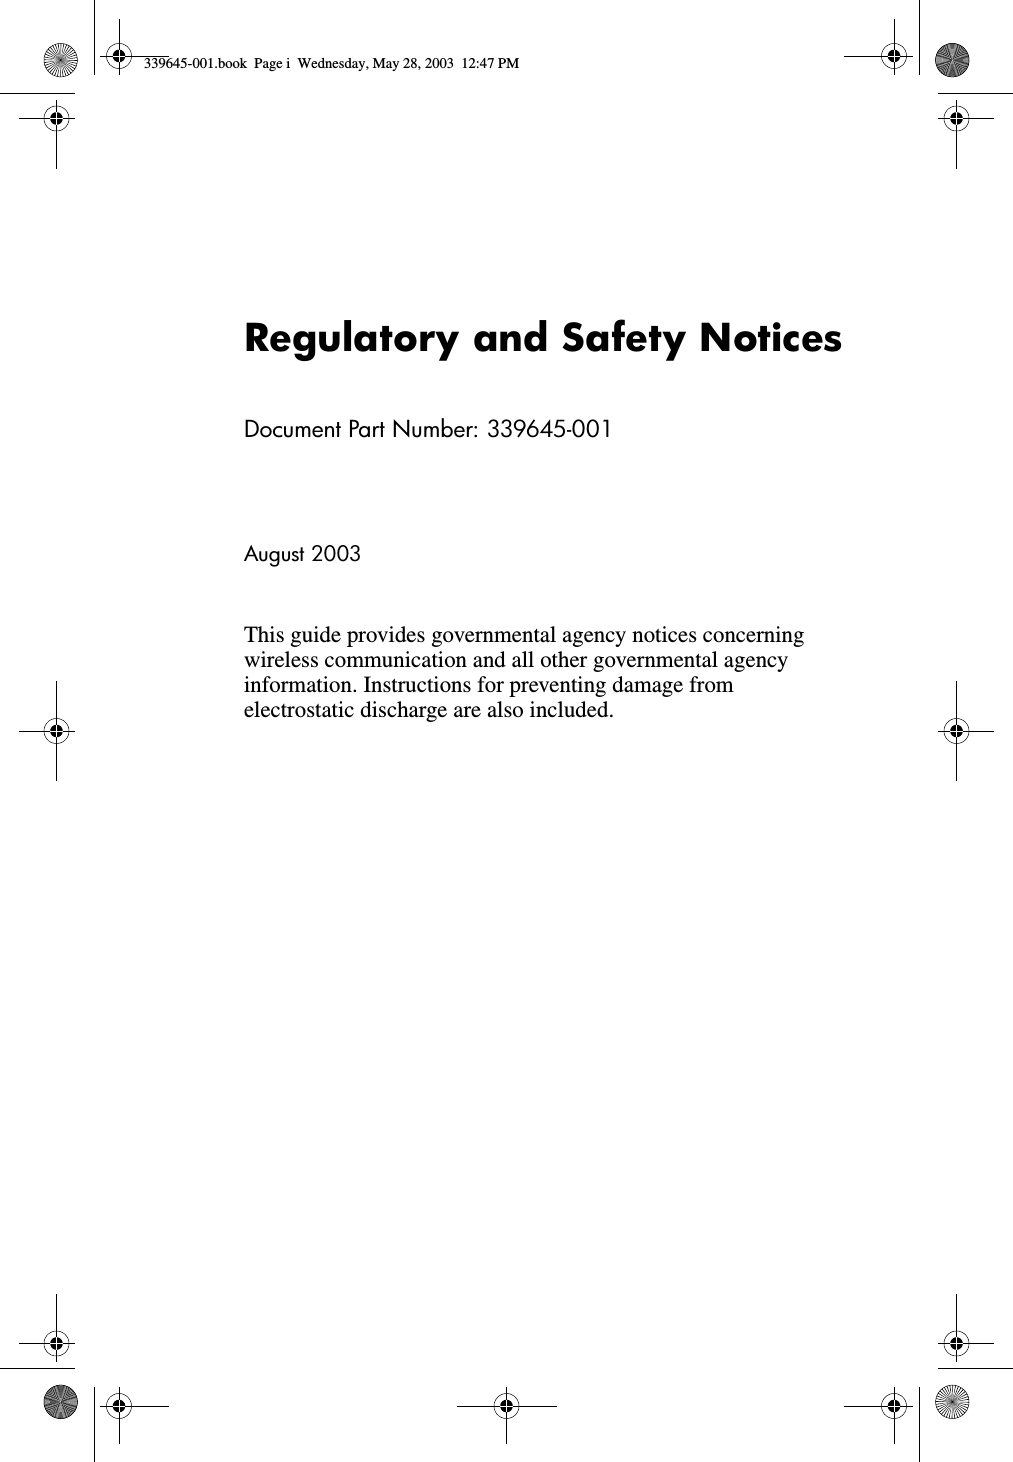 Regulatory and Safety NoticesDocument Part Number: 339645-001August 2003This guide provides governmental agency notices concerning wireless communication and all other governmental agency information. Instructions for preventing damage from electrostatic discharge are also included.339645-001.book  Page i  Wednesday, May 28, 2003  12:47 PM